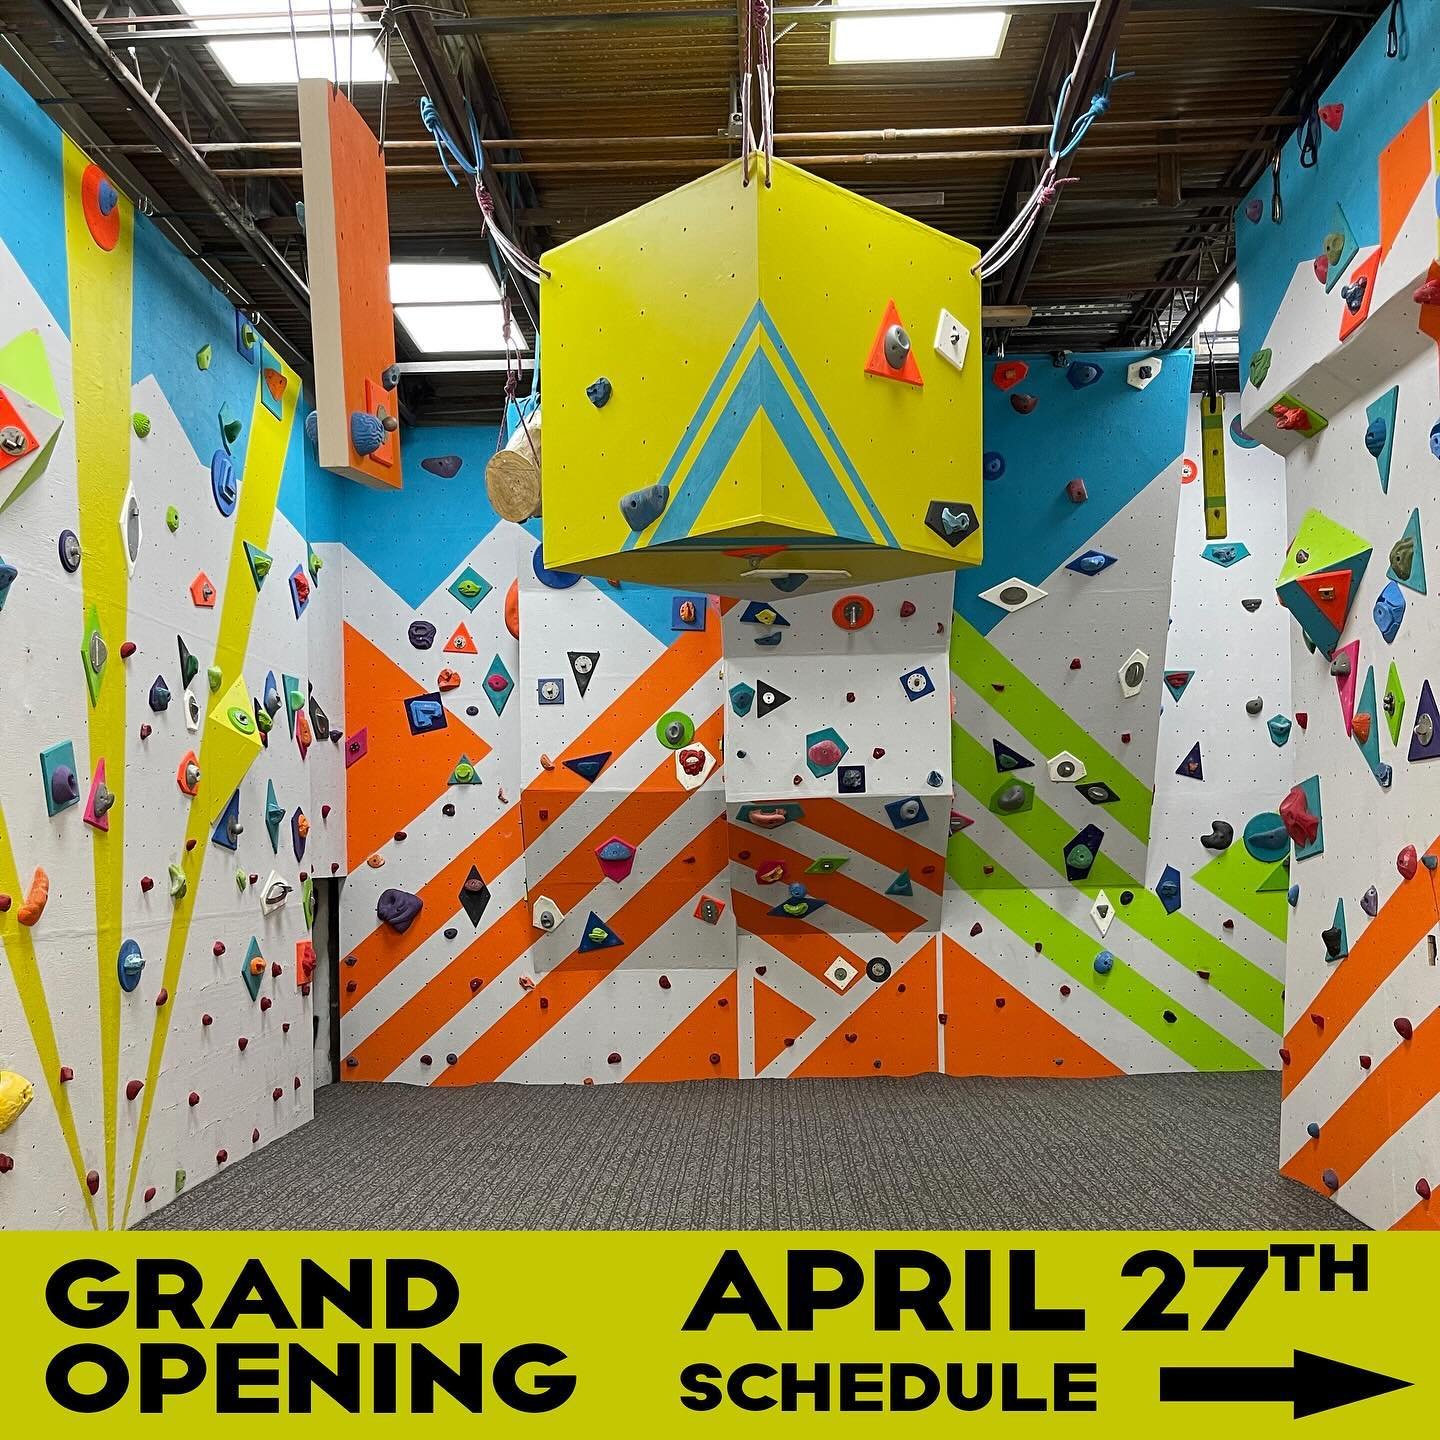 Schedule for the Grand Opening on April 27th! 

The carpet got installed today, and the gym is basically ready to go for the Grand Opening and the Novus Ordo Scalpendi Comp! 

Please join us for the festivities. 
10am: Opening ceremony
10am-12pm: Ope